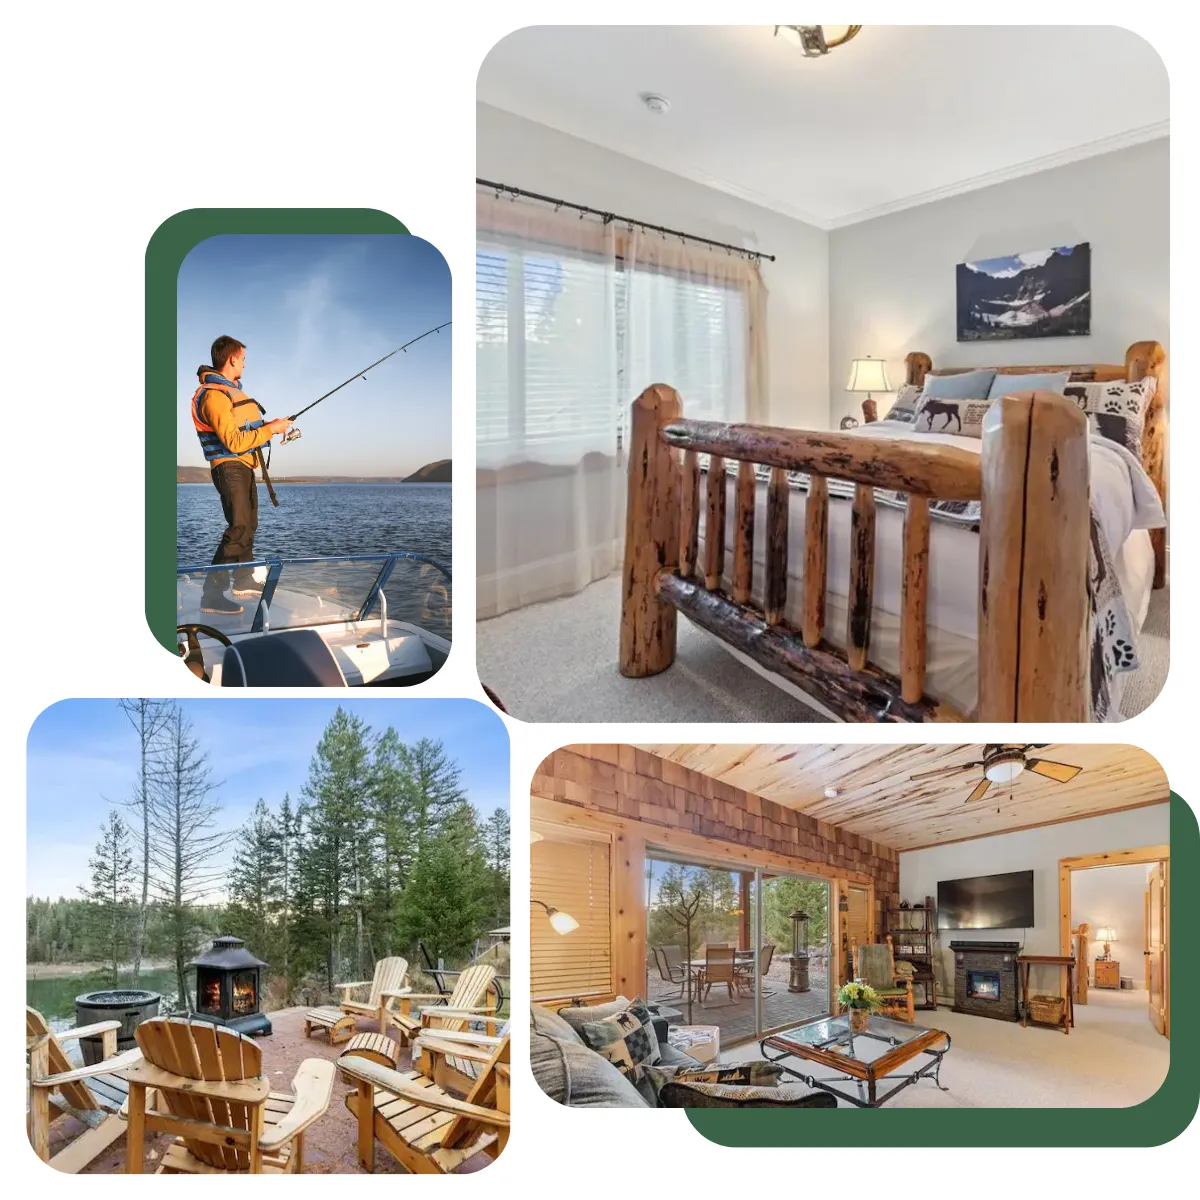 Relax in Glacier Paradise with loved ones in 3-bed, 3.5-bath space for 12 guests. Modern amenities, fun games, and outdoor activities await, promising excitement and tranquility combined.